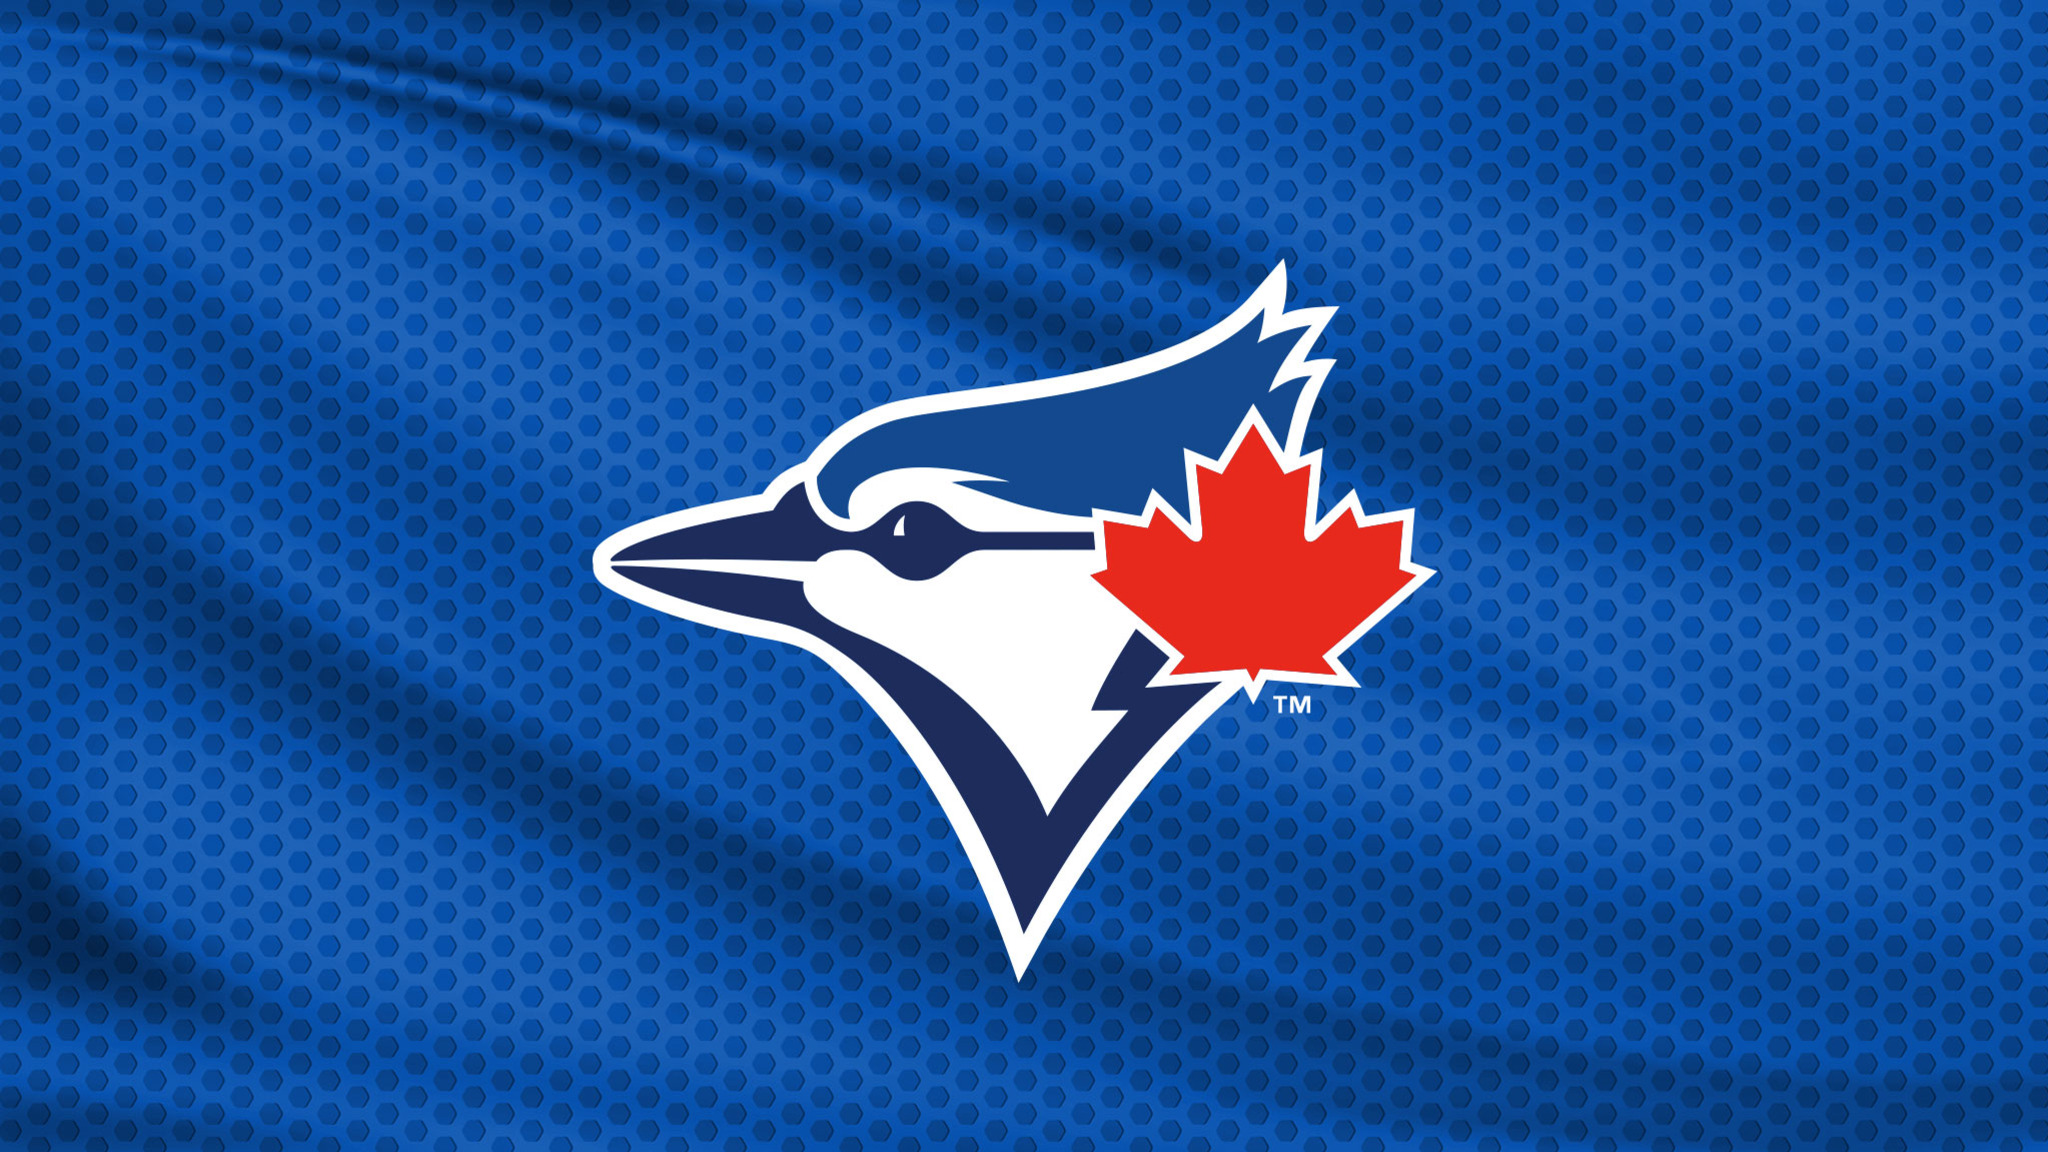 OFFICIAL: Introducing your 2022 - Toronto Blue Jays